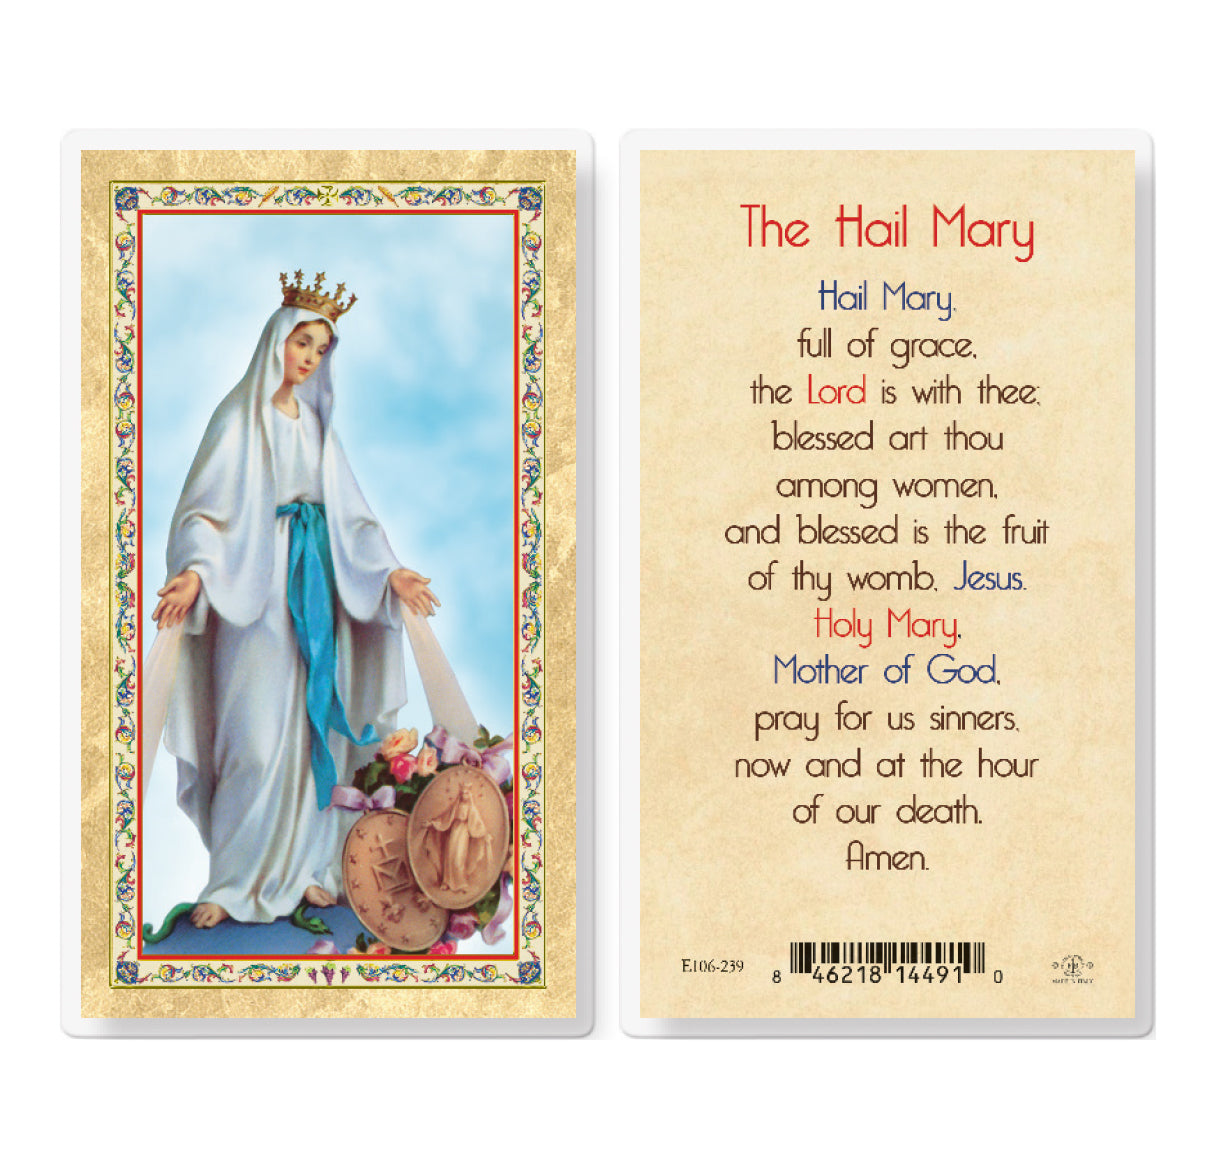 The Hail Mary - Our Lady of Grace Gold-Stamped Laminated Catholic Prayer Holy Card with Prayer on Back, Pack of 25